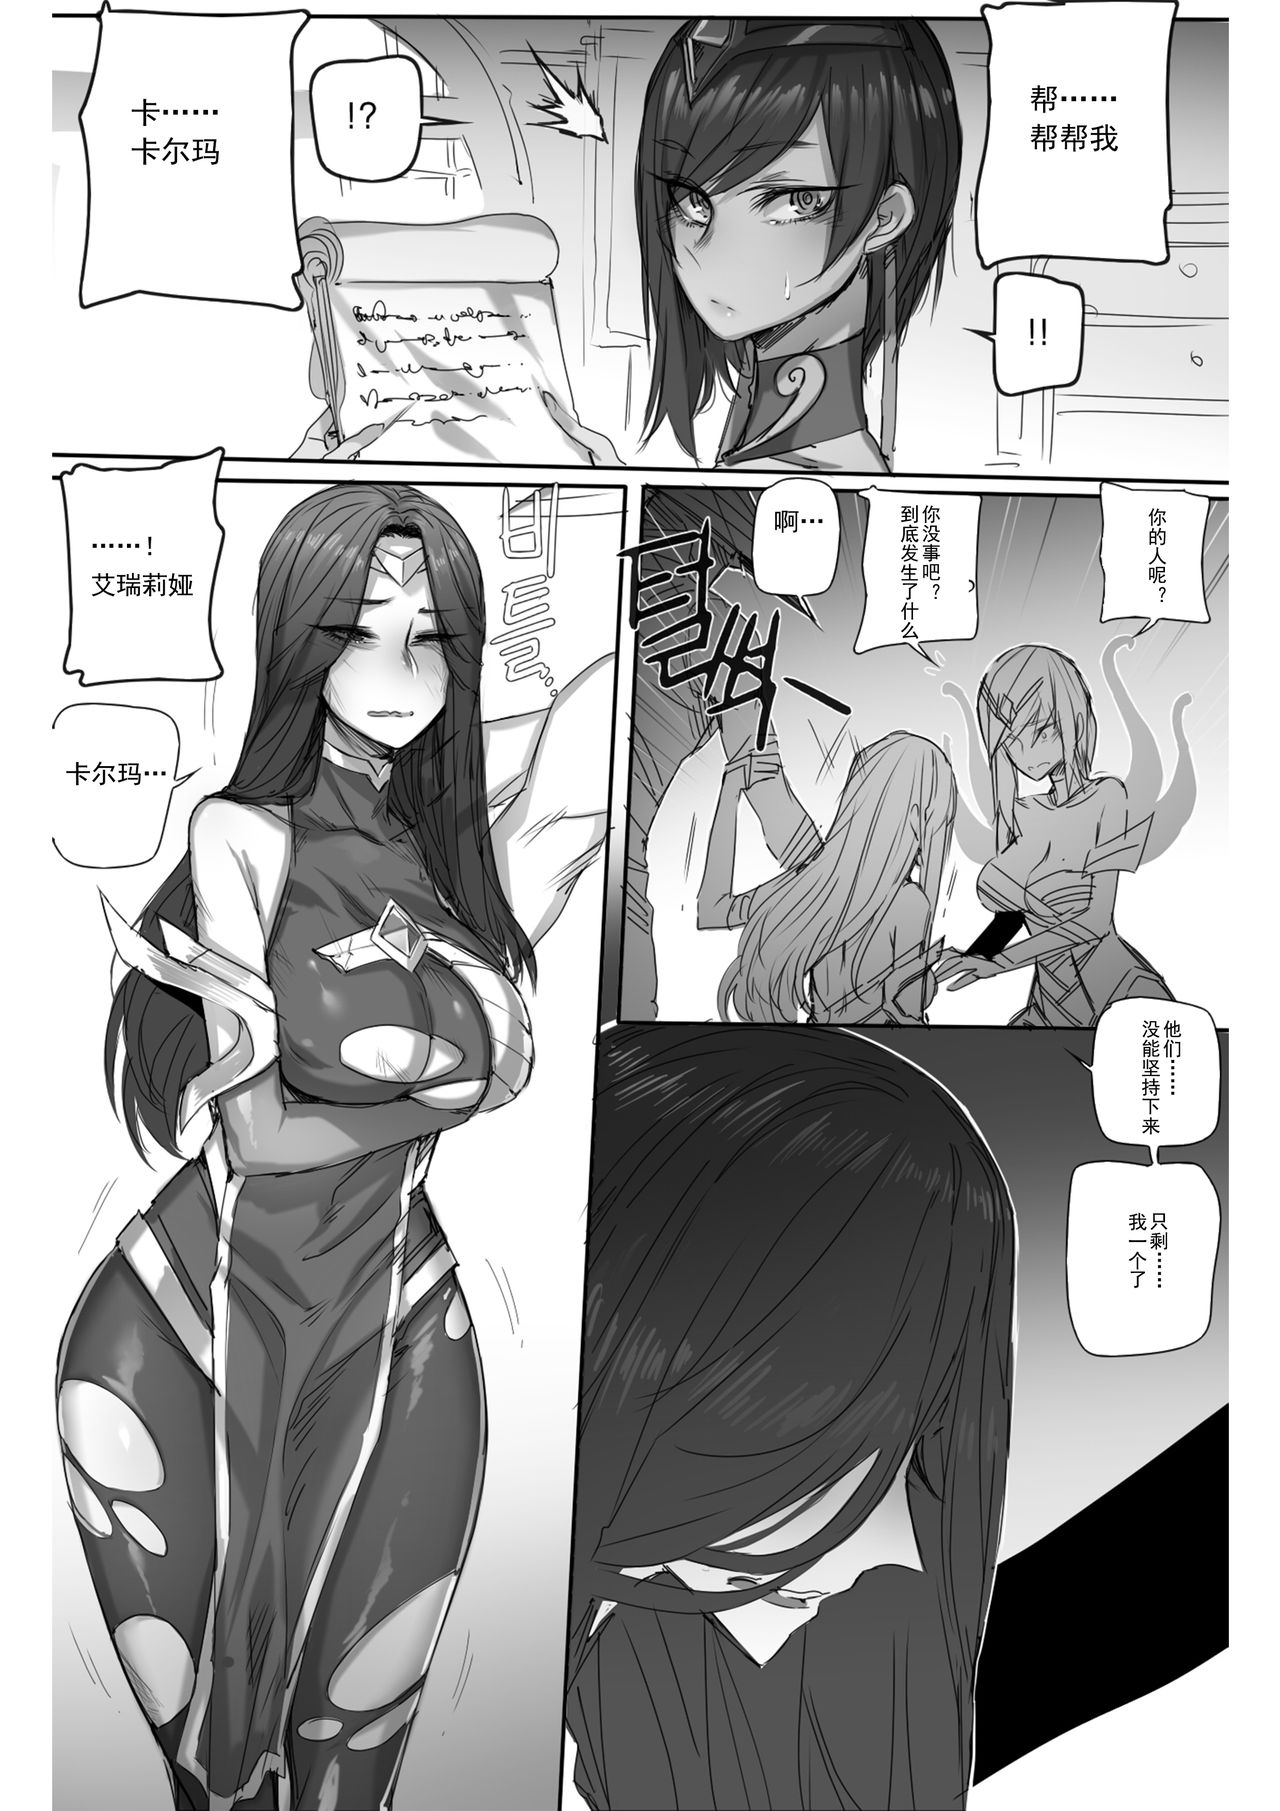 [ratatatat74] For the Noxus (League of Legends) [Chinese][挽歌个人汉化] [ratatatat74] For the Noxus (リーグ・オブ・レジェンズ) [中国翻訳]